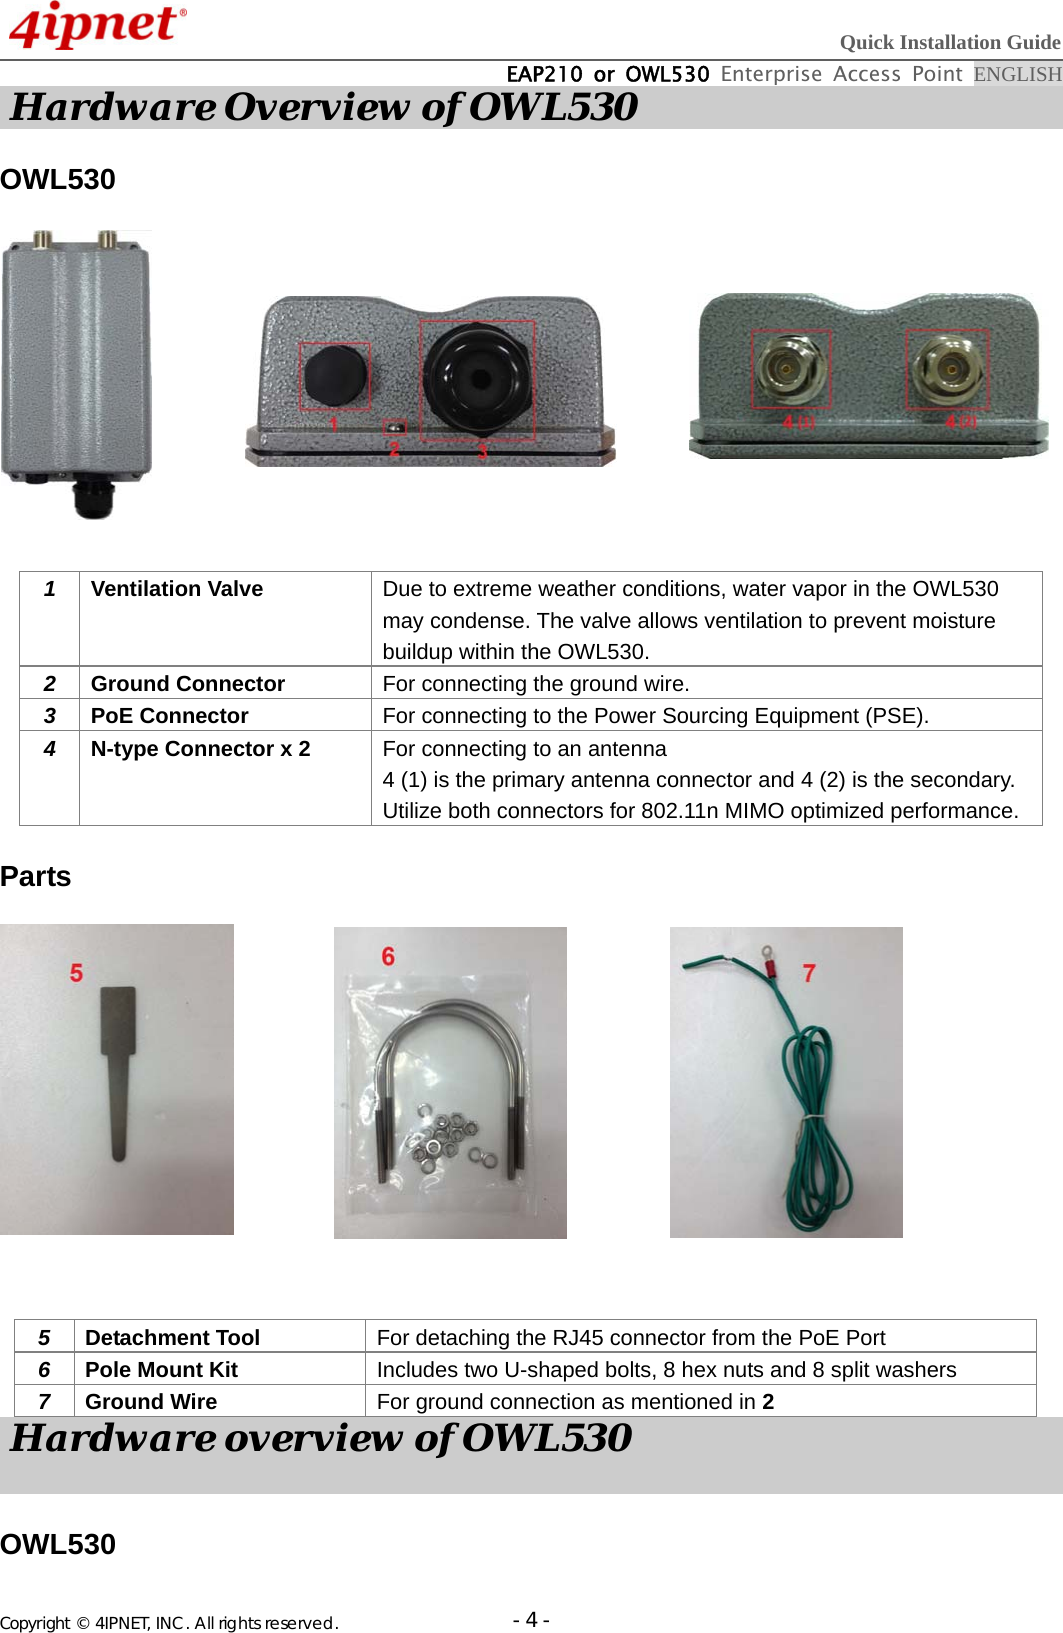  Quick Installation Guide  EAP210 or OWL530 Enterprise Access Point ENGLISH Copyright © 4IPNET, INC. All rights reserved.                       - 4 - Hardware Overview of OWL530  OWL530             1  Ventilation Valve  Due to extreme weather conditions, water vapor in the OWL530 may condense. The valve allows ventilation to prevent moisture buildup within the OWL530. 2  Ground Connector  For connecting the ground wire. 3  PoE Connector  For connecting to the Power Sourcing Equipment (PSE). 4  N-type Connector x 2  For connecting to an antenna   4 (1) is the primary antenna connector and 4 (2) is the secondary. Utilize both connectors for 802.11n MIMO optimized performance.  Parts             Hardware overview of OWL530  OWL530 5  Detachment Tool  For detaching the RJ45 connector from the PoE Port   6  Pole Mount Kit  Includes two U-shaped bolts, 8 hex nuts and 8 split washers 7  Ground Wire  For ground connection as mentioned in 2   